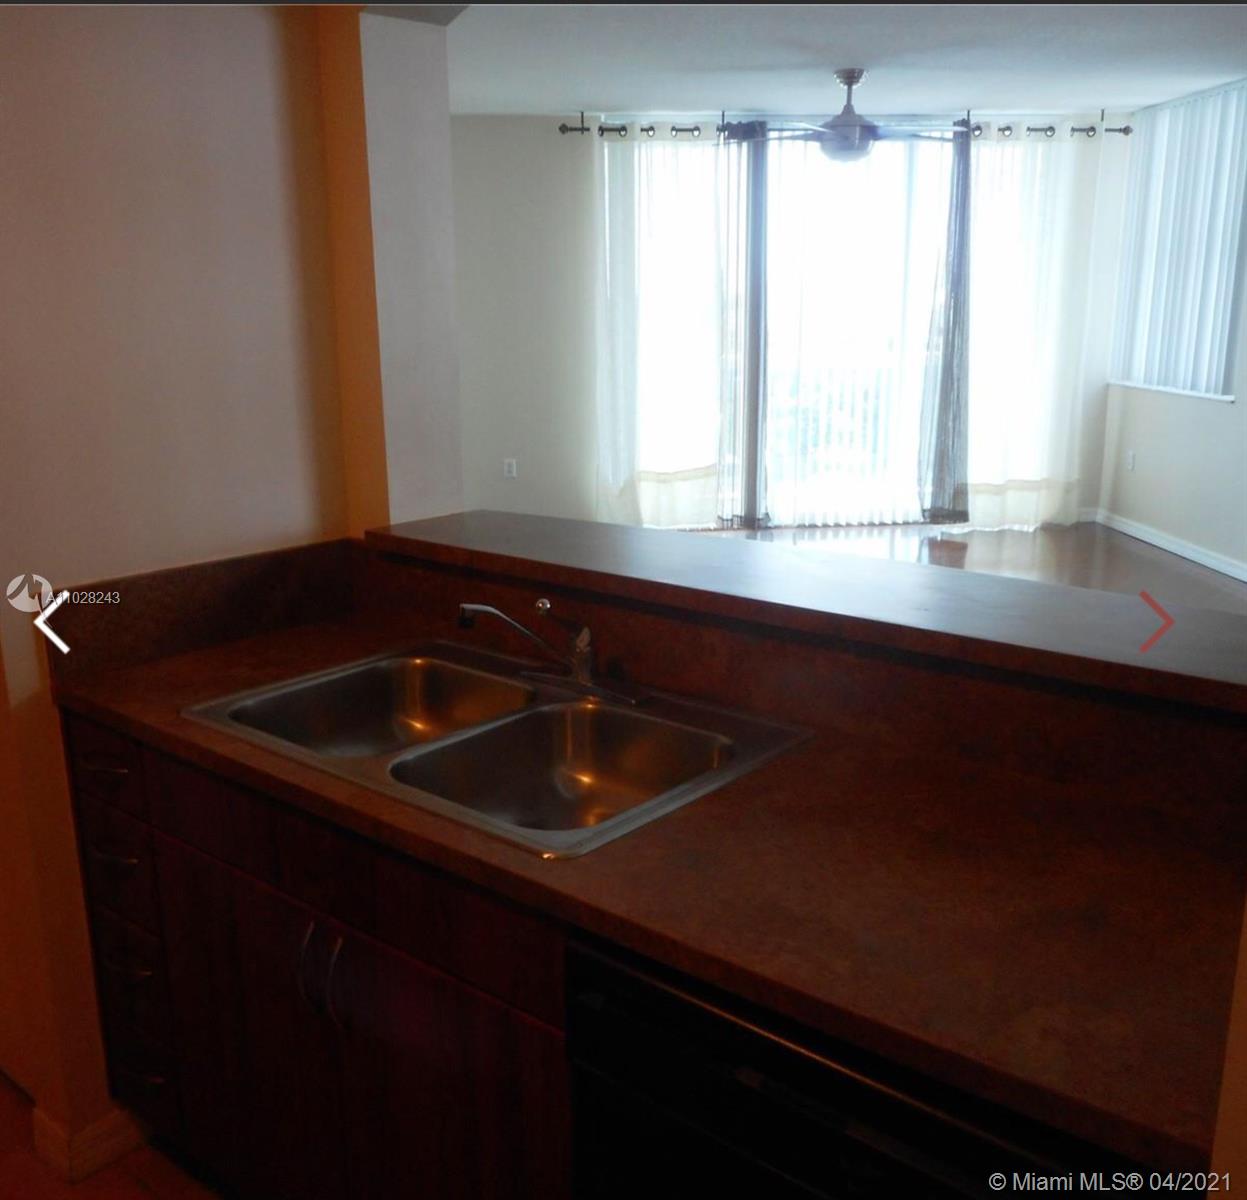 Photo 23 of The Waverly At Surfside B Apt 921 in Surfside - MLS A11028243